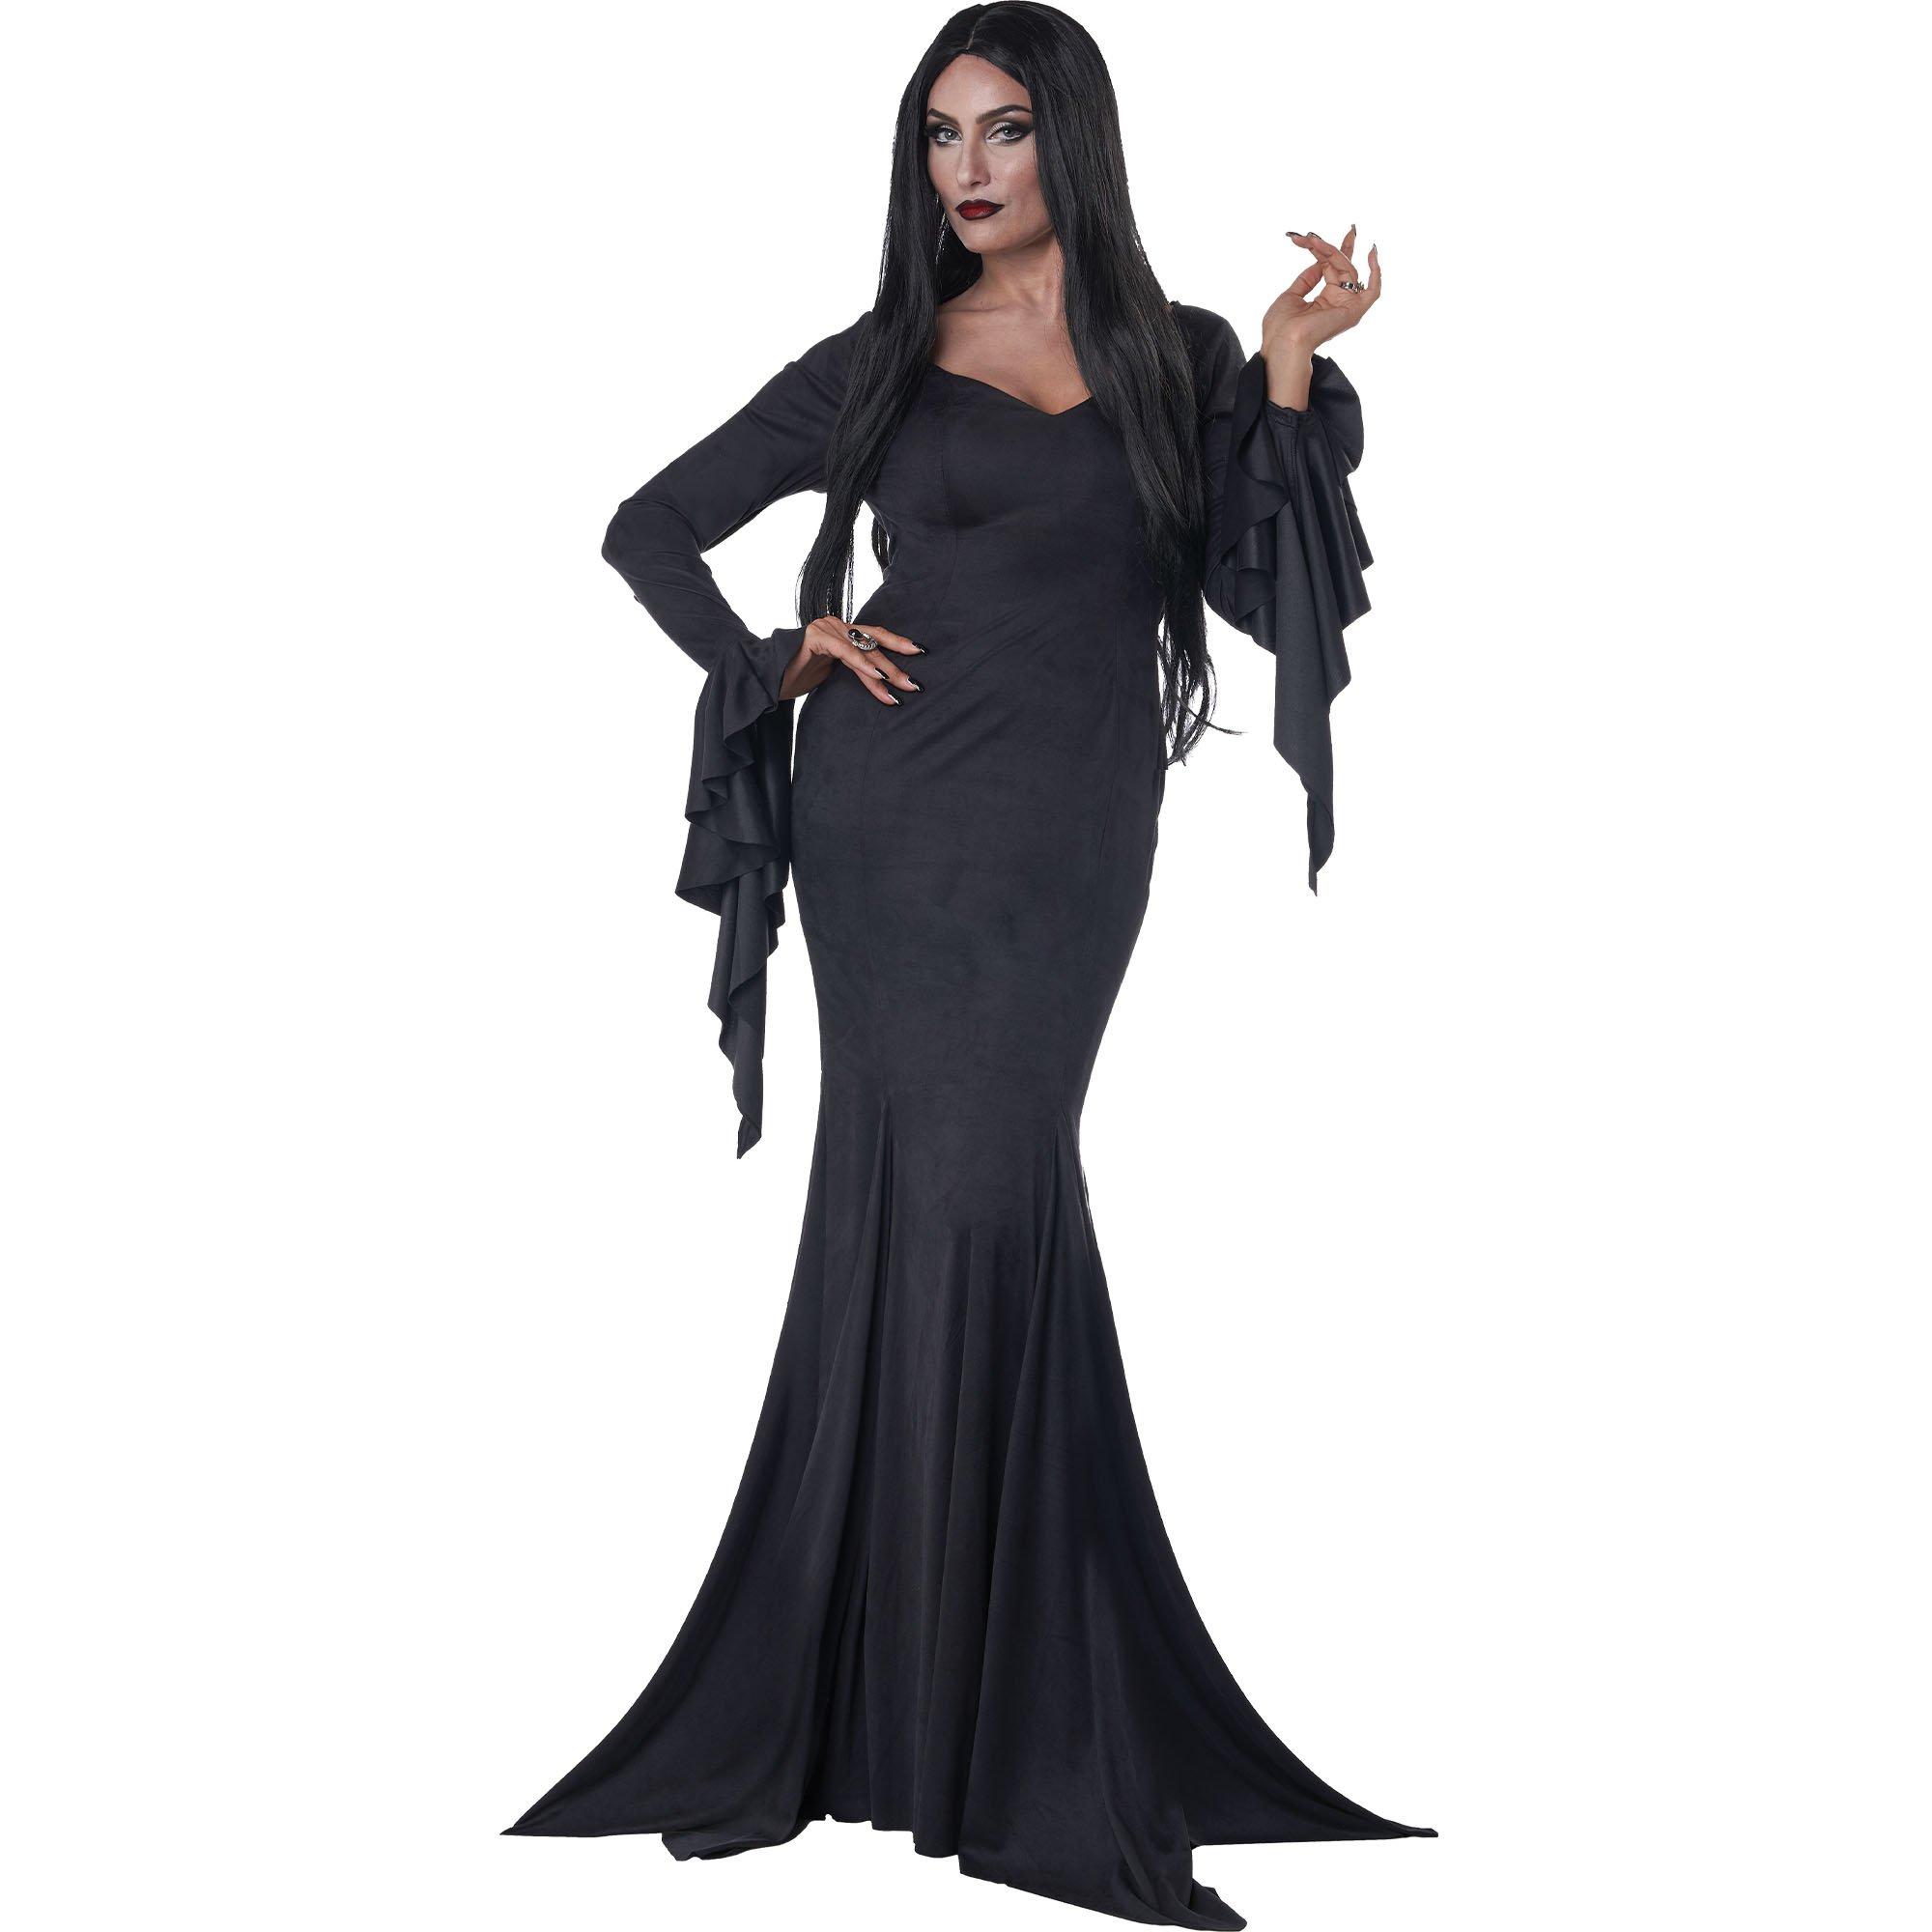 Womens Sexy Adult Gothic Mistress Bride Costume